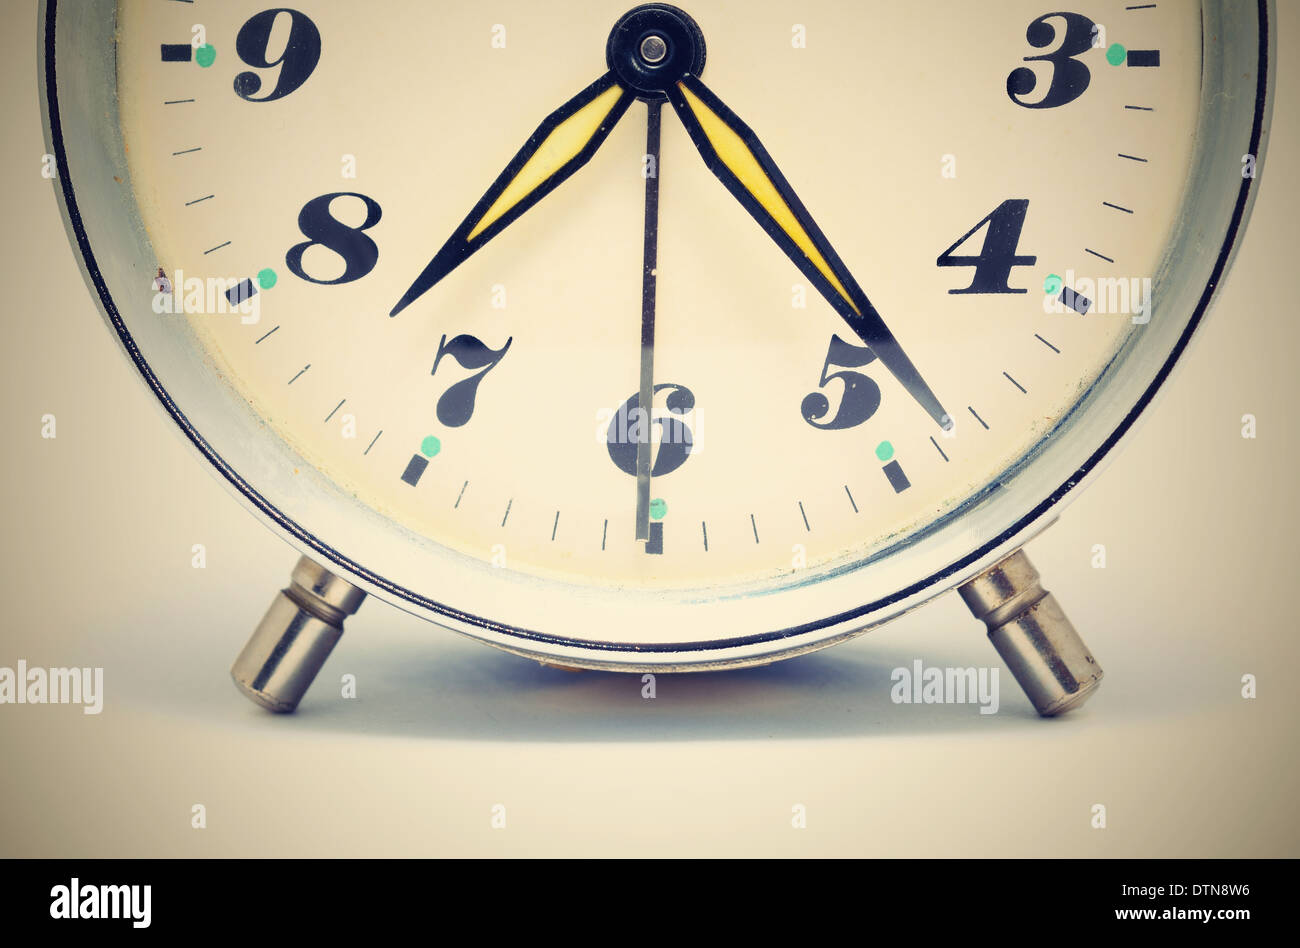 Closeup shot of the old dial alarm clock with yellow hands. Stock Photo